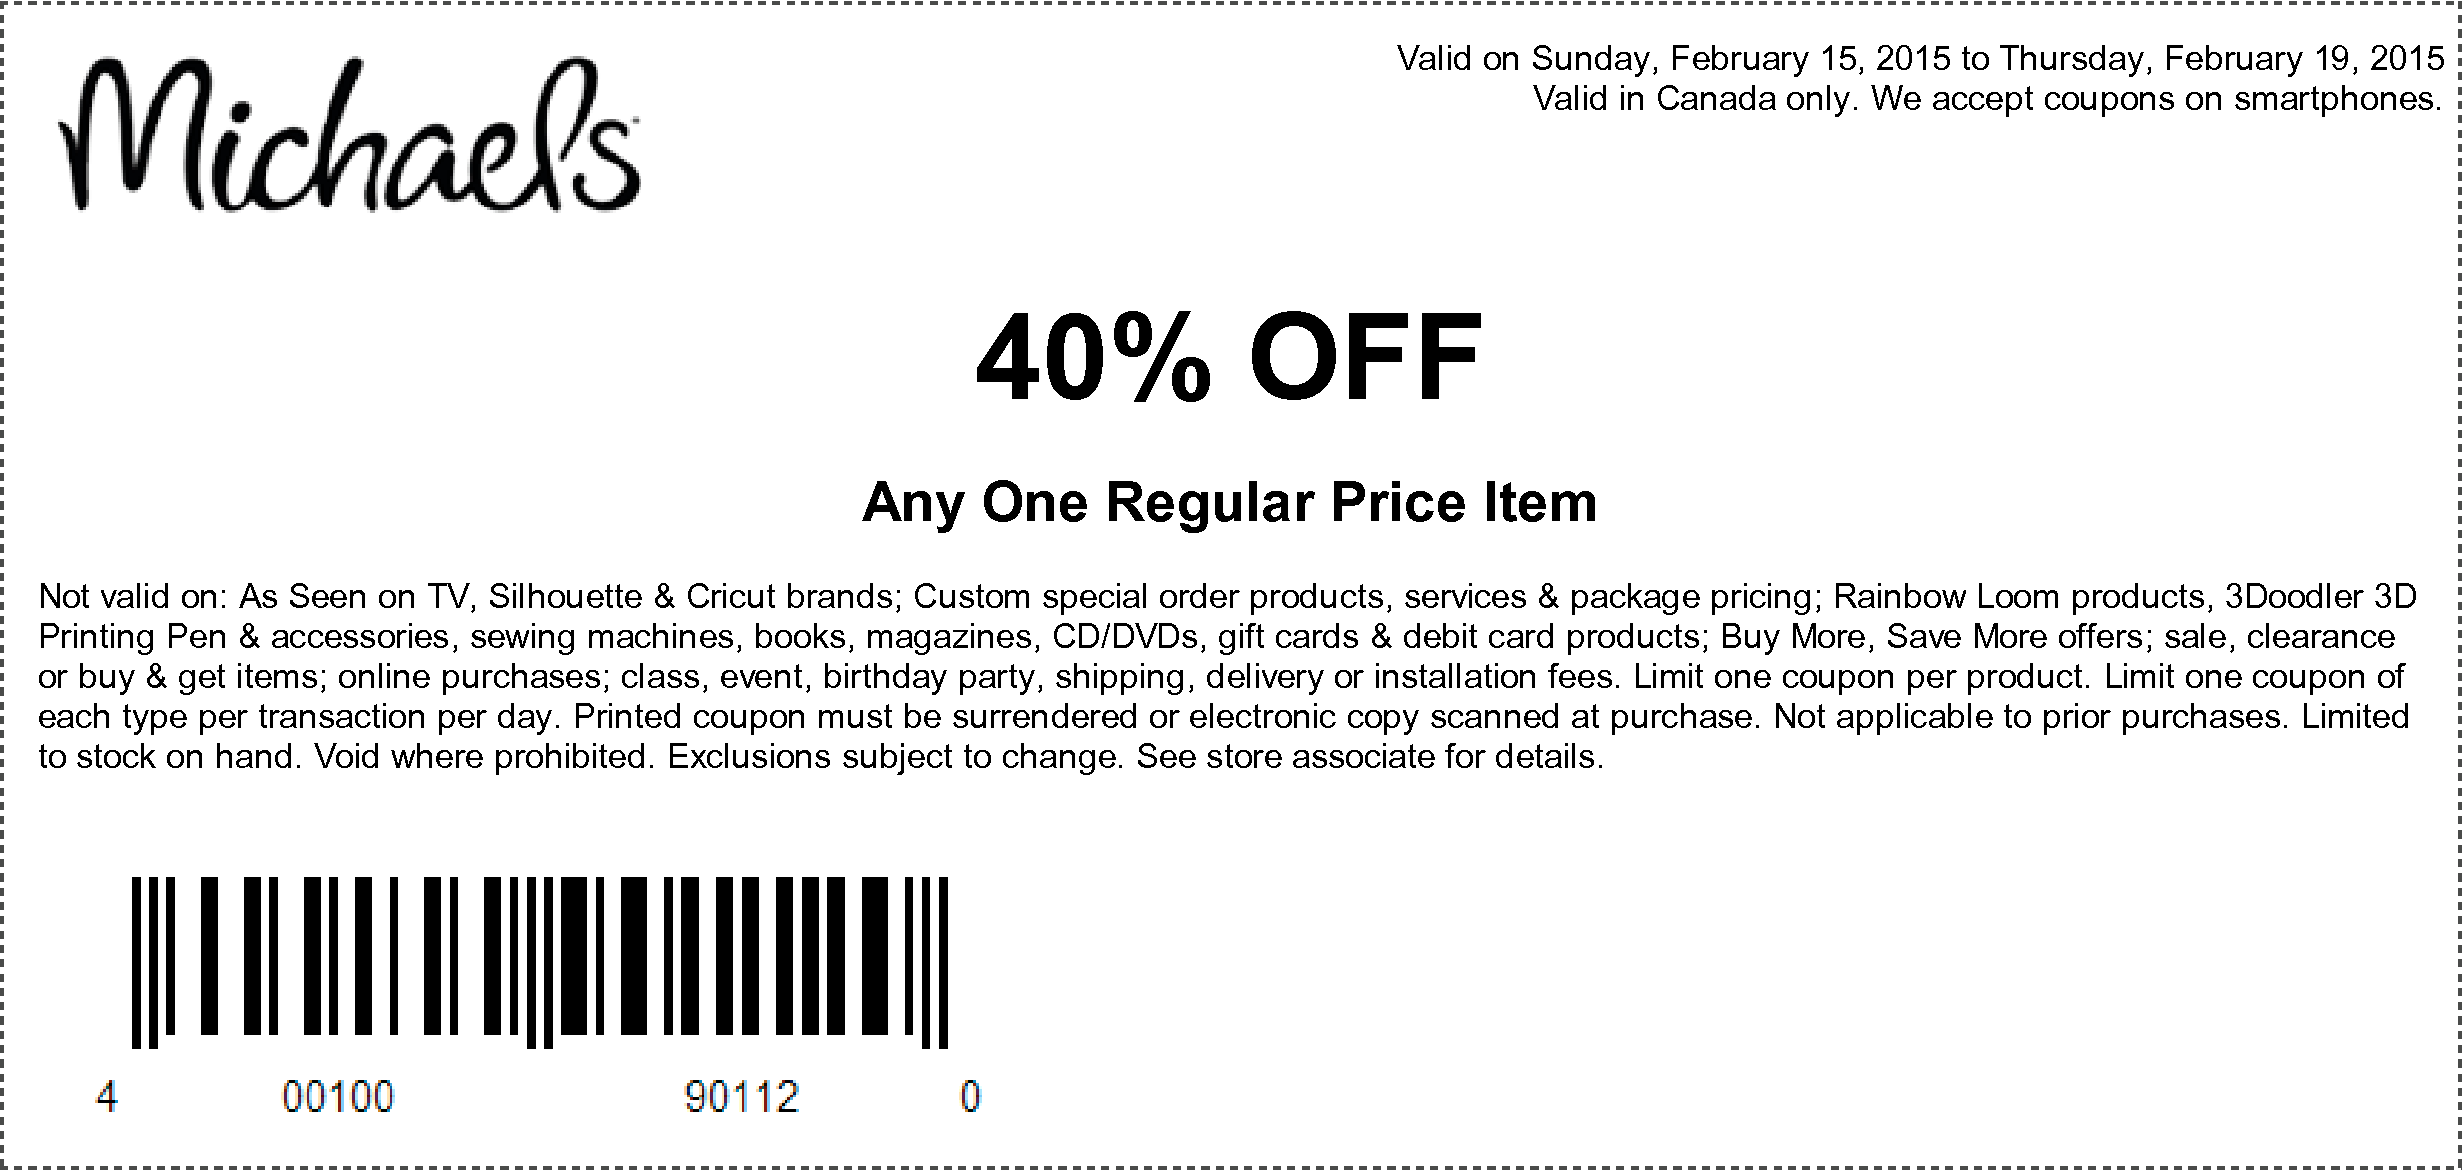 Michaels Coupons: 25% Off Your Entire Purchase 40% Off Any One Regular